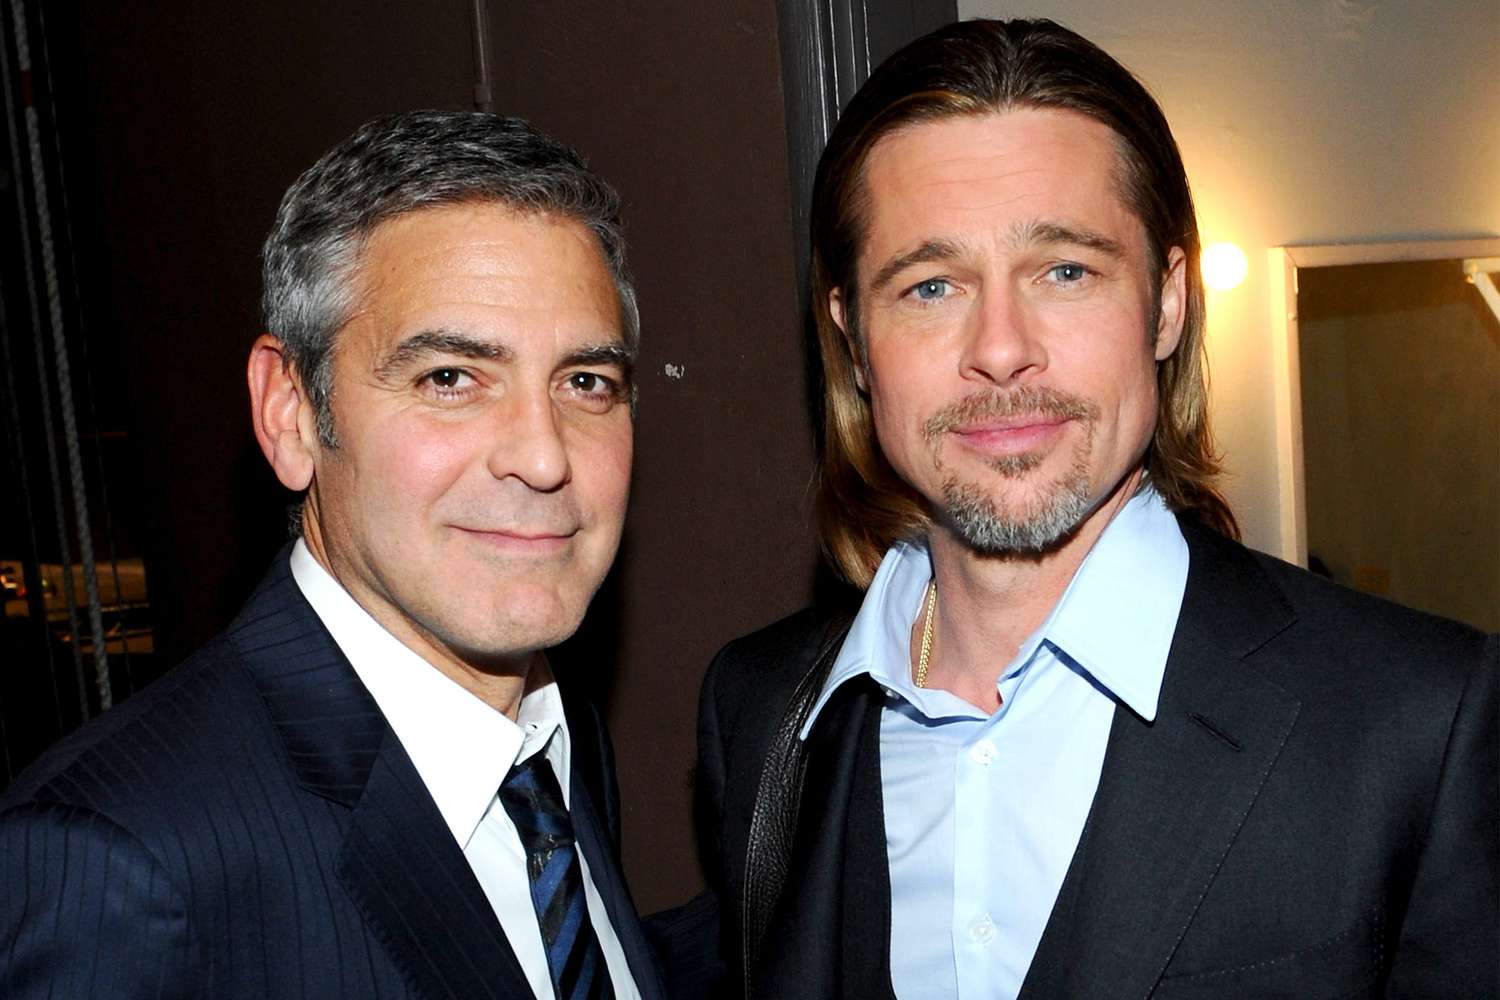 George Clooney reacts to Brad Pitt calling him 'the most handsome man'